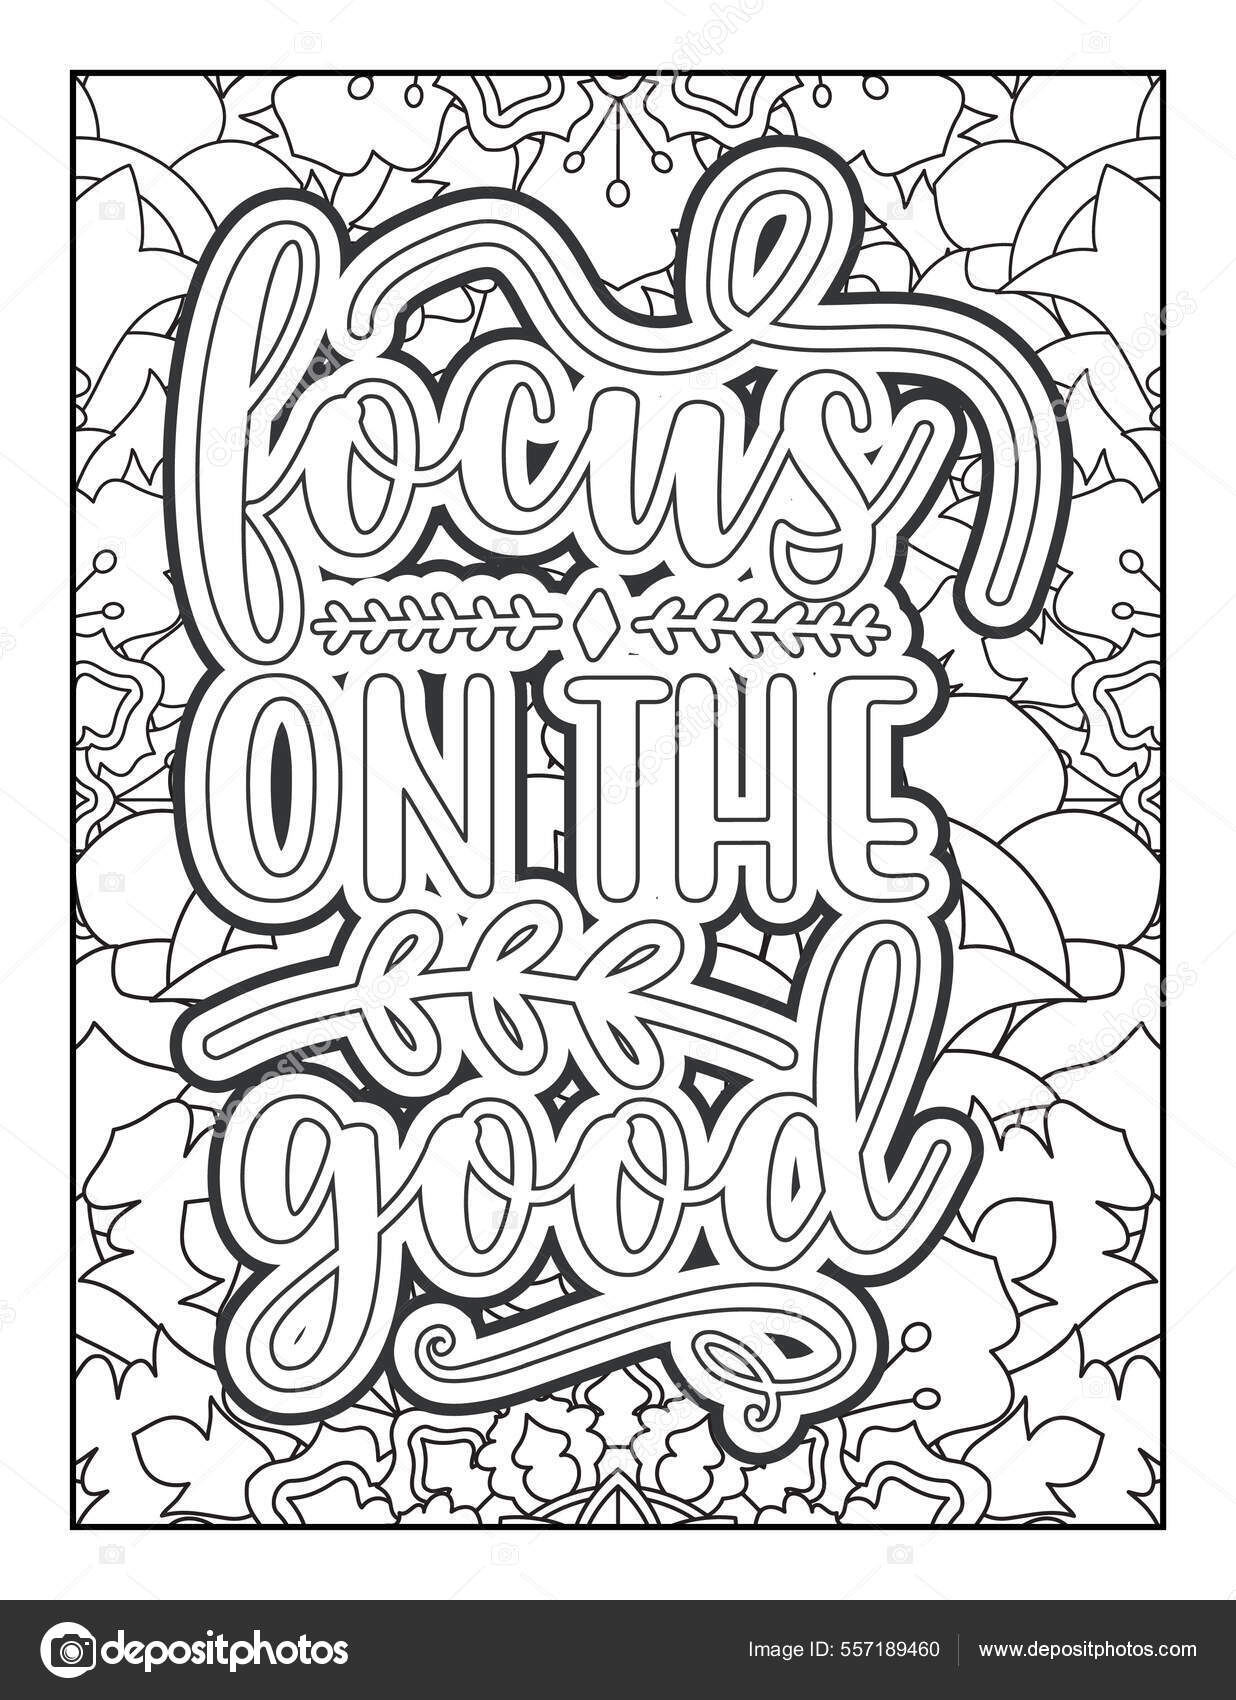 Motivational quotes coloring page inspirational quotes coloring page affirmative quotes stock vector by mirajeee